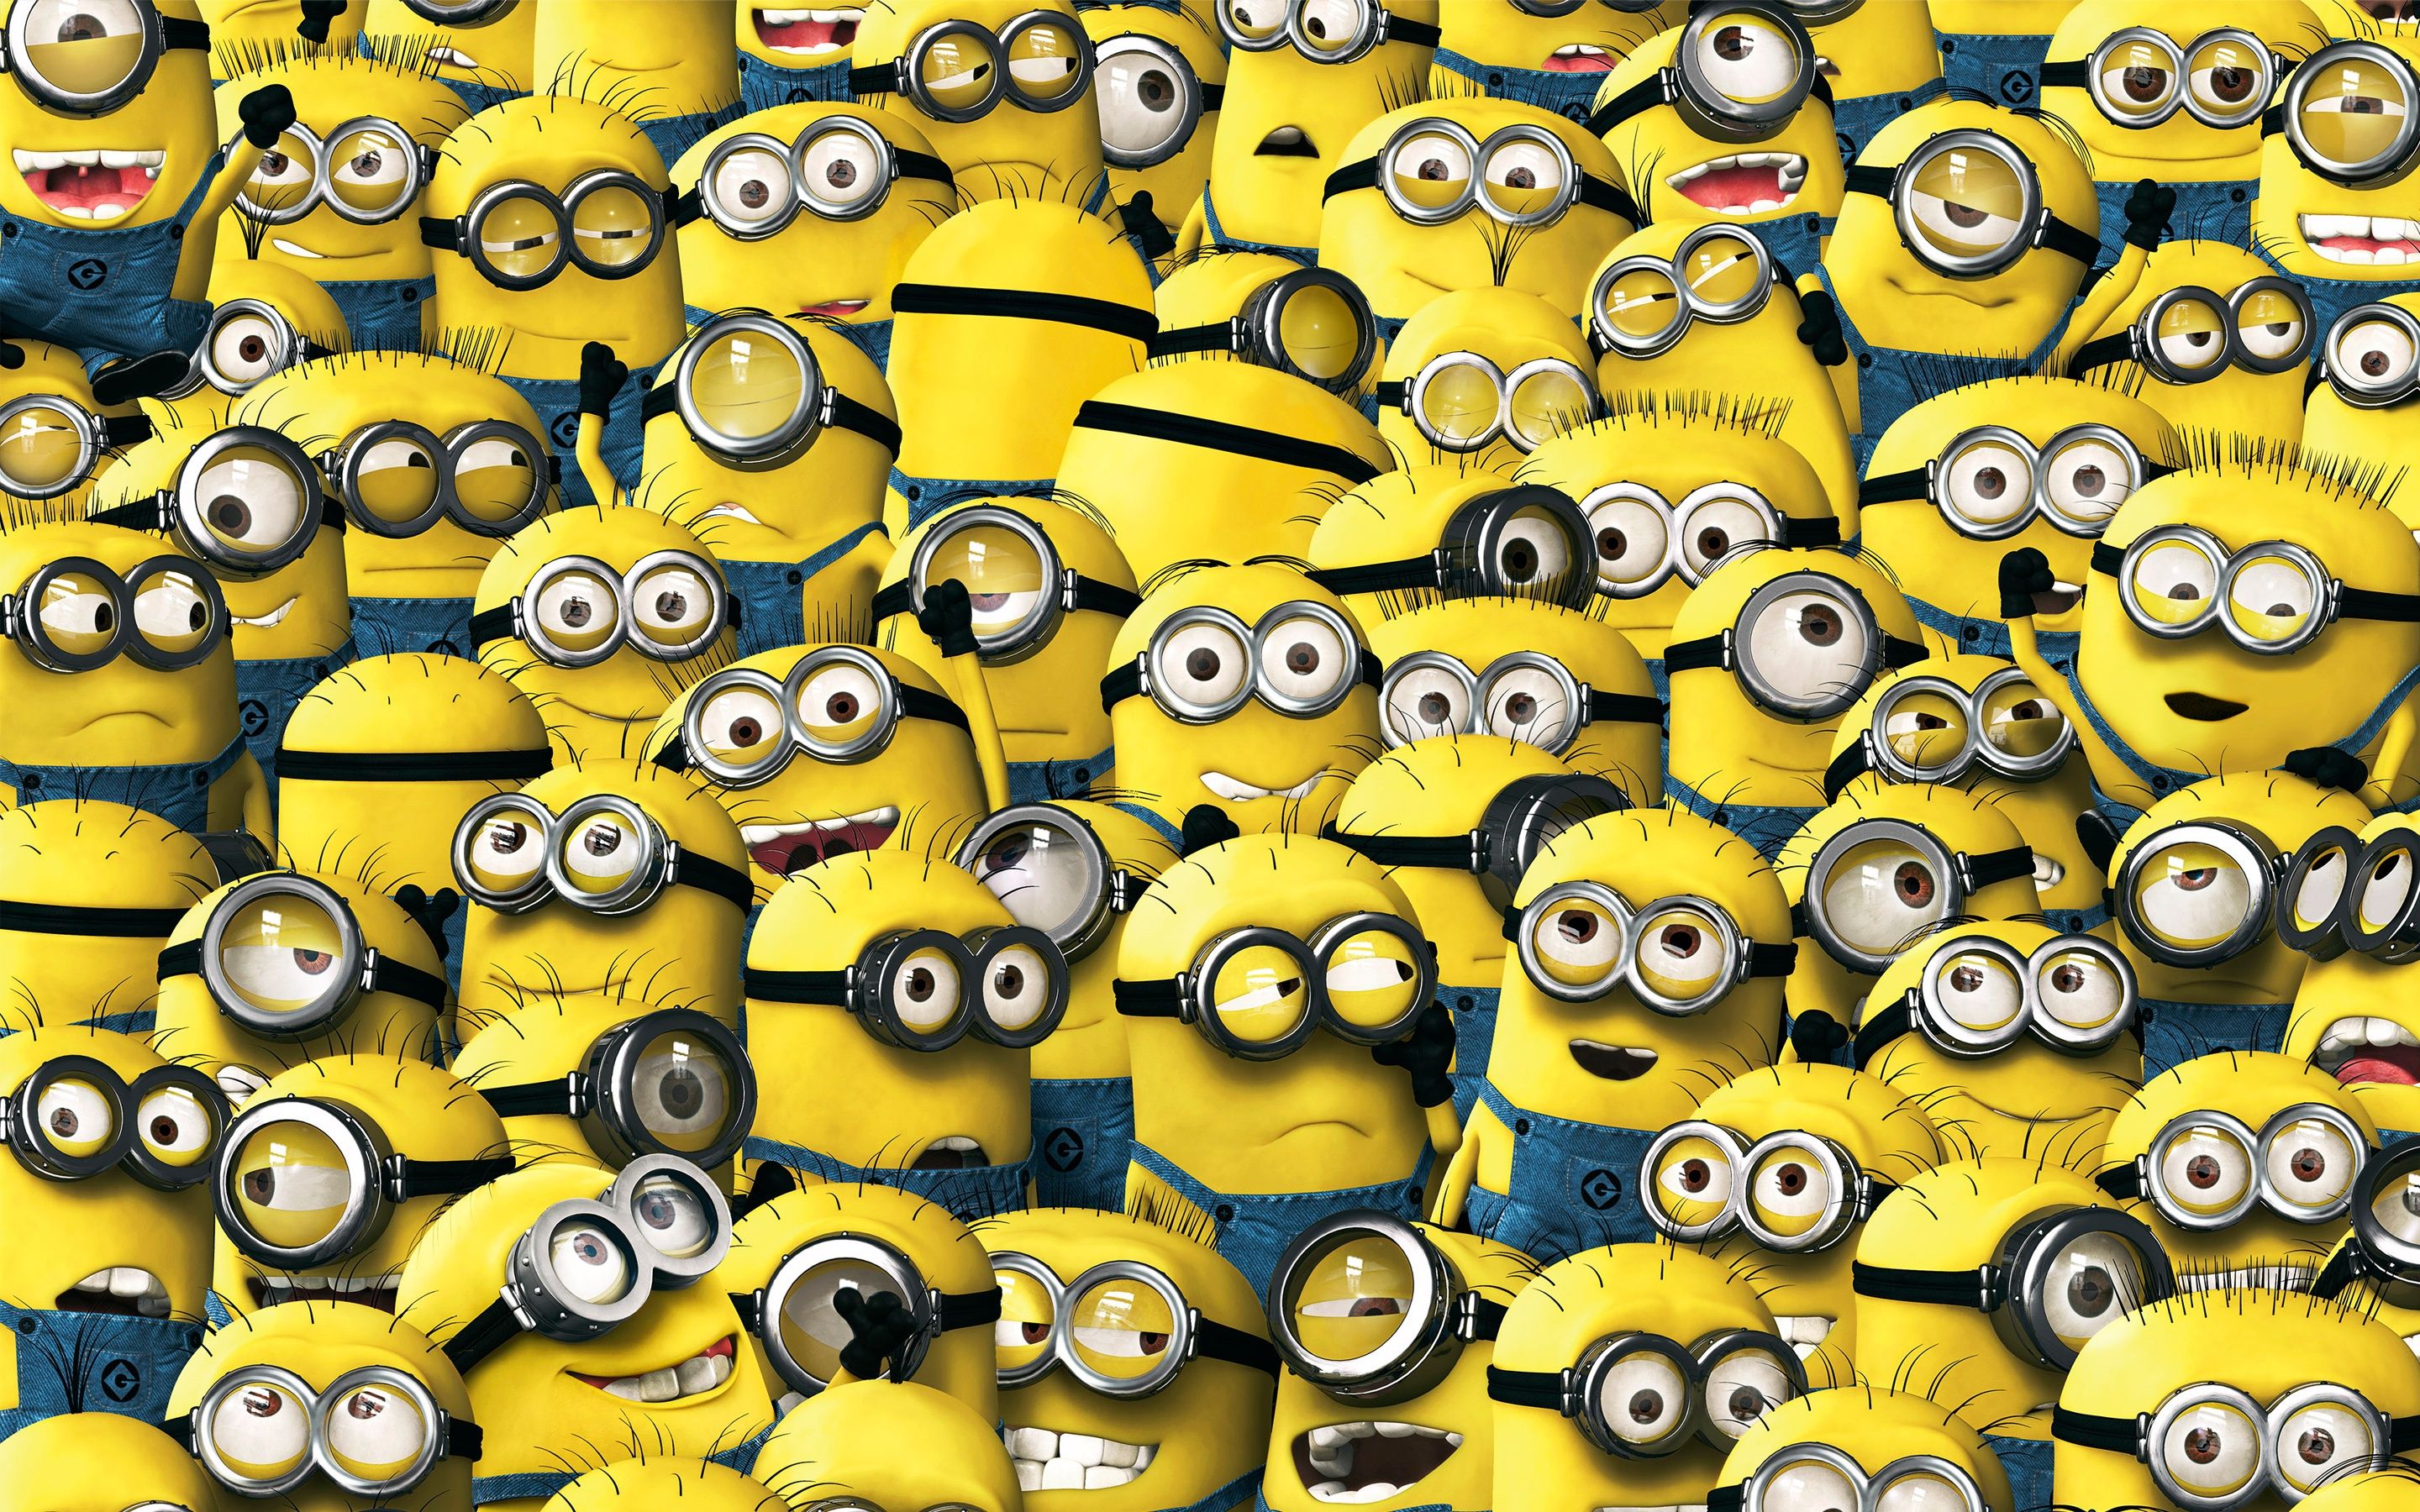 Minions - Despicable Me 2 Wallpaper Ideas 2913 Hd Wallpapers ...